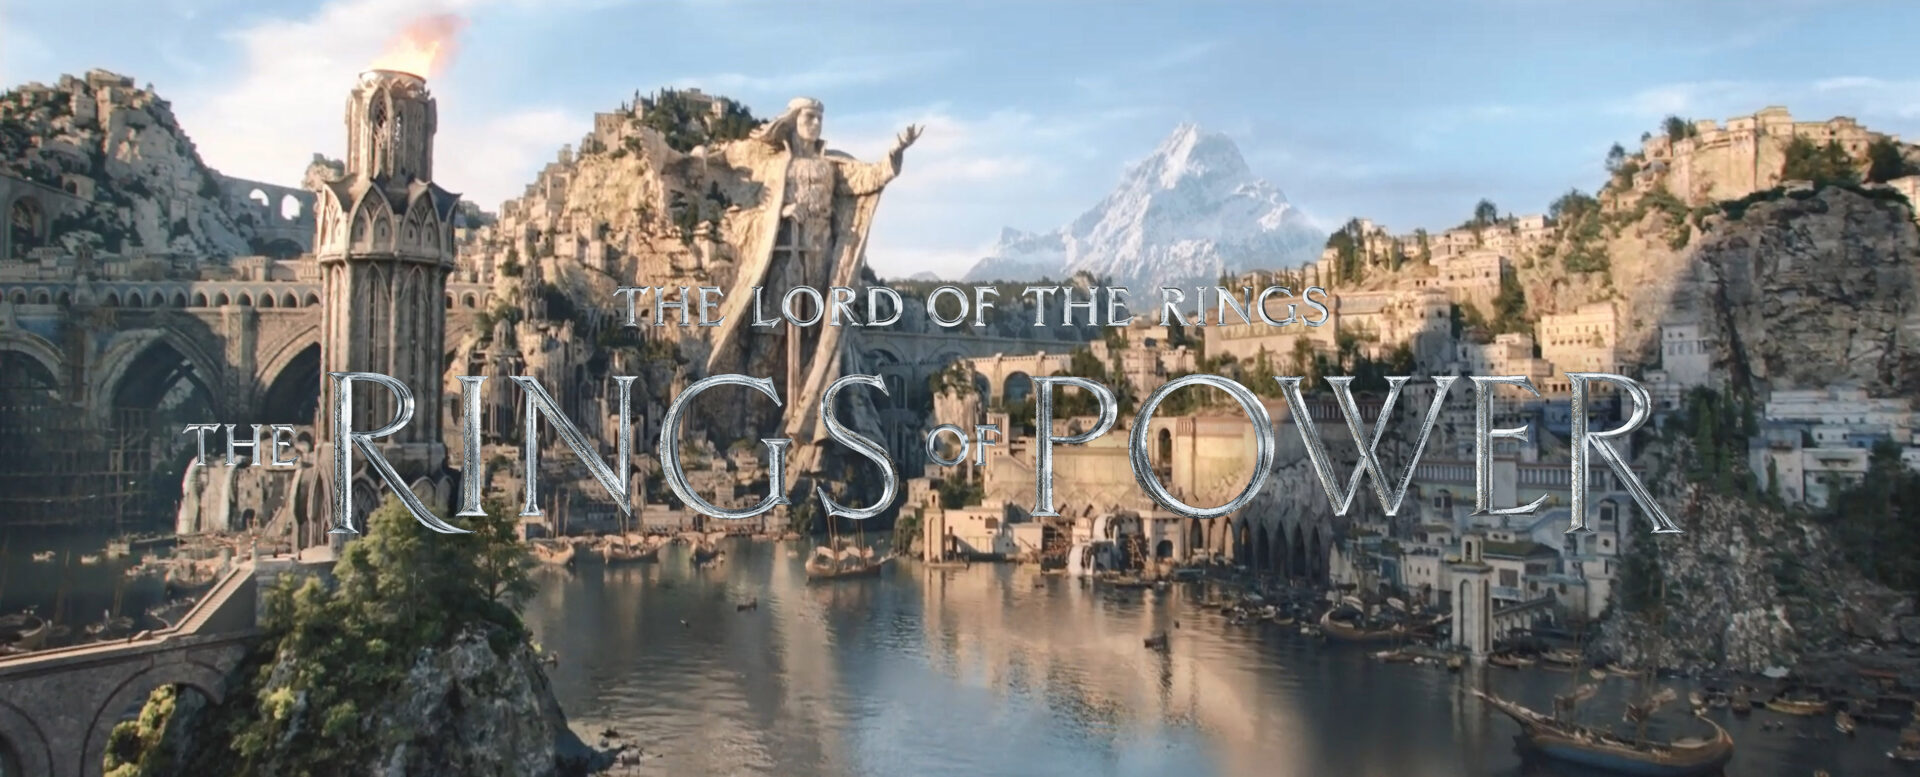 The Lord of the Rings: The Rings of Power – Main Teasers: The